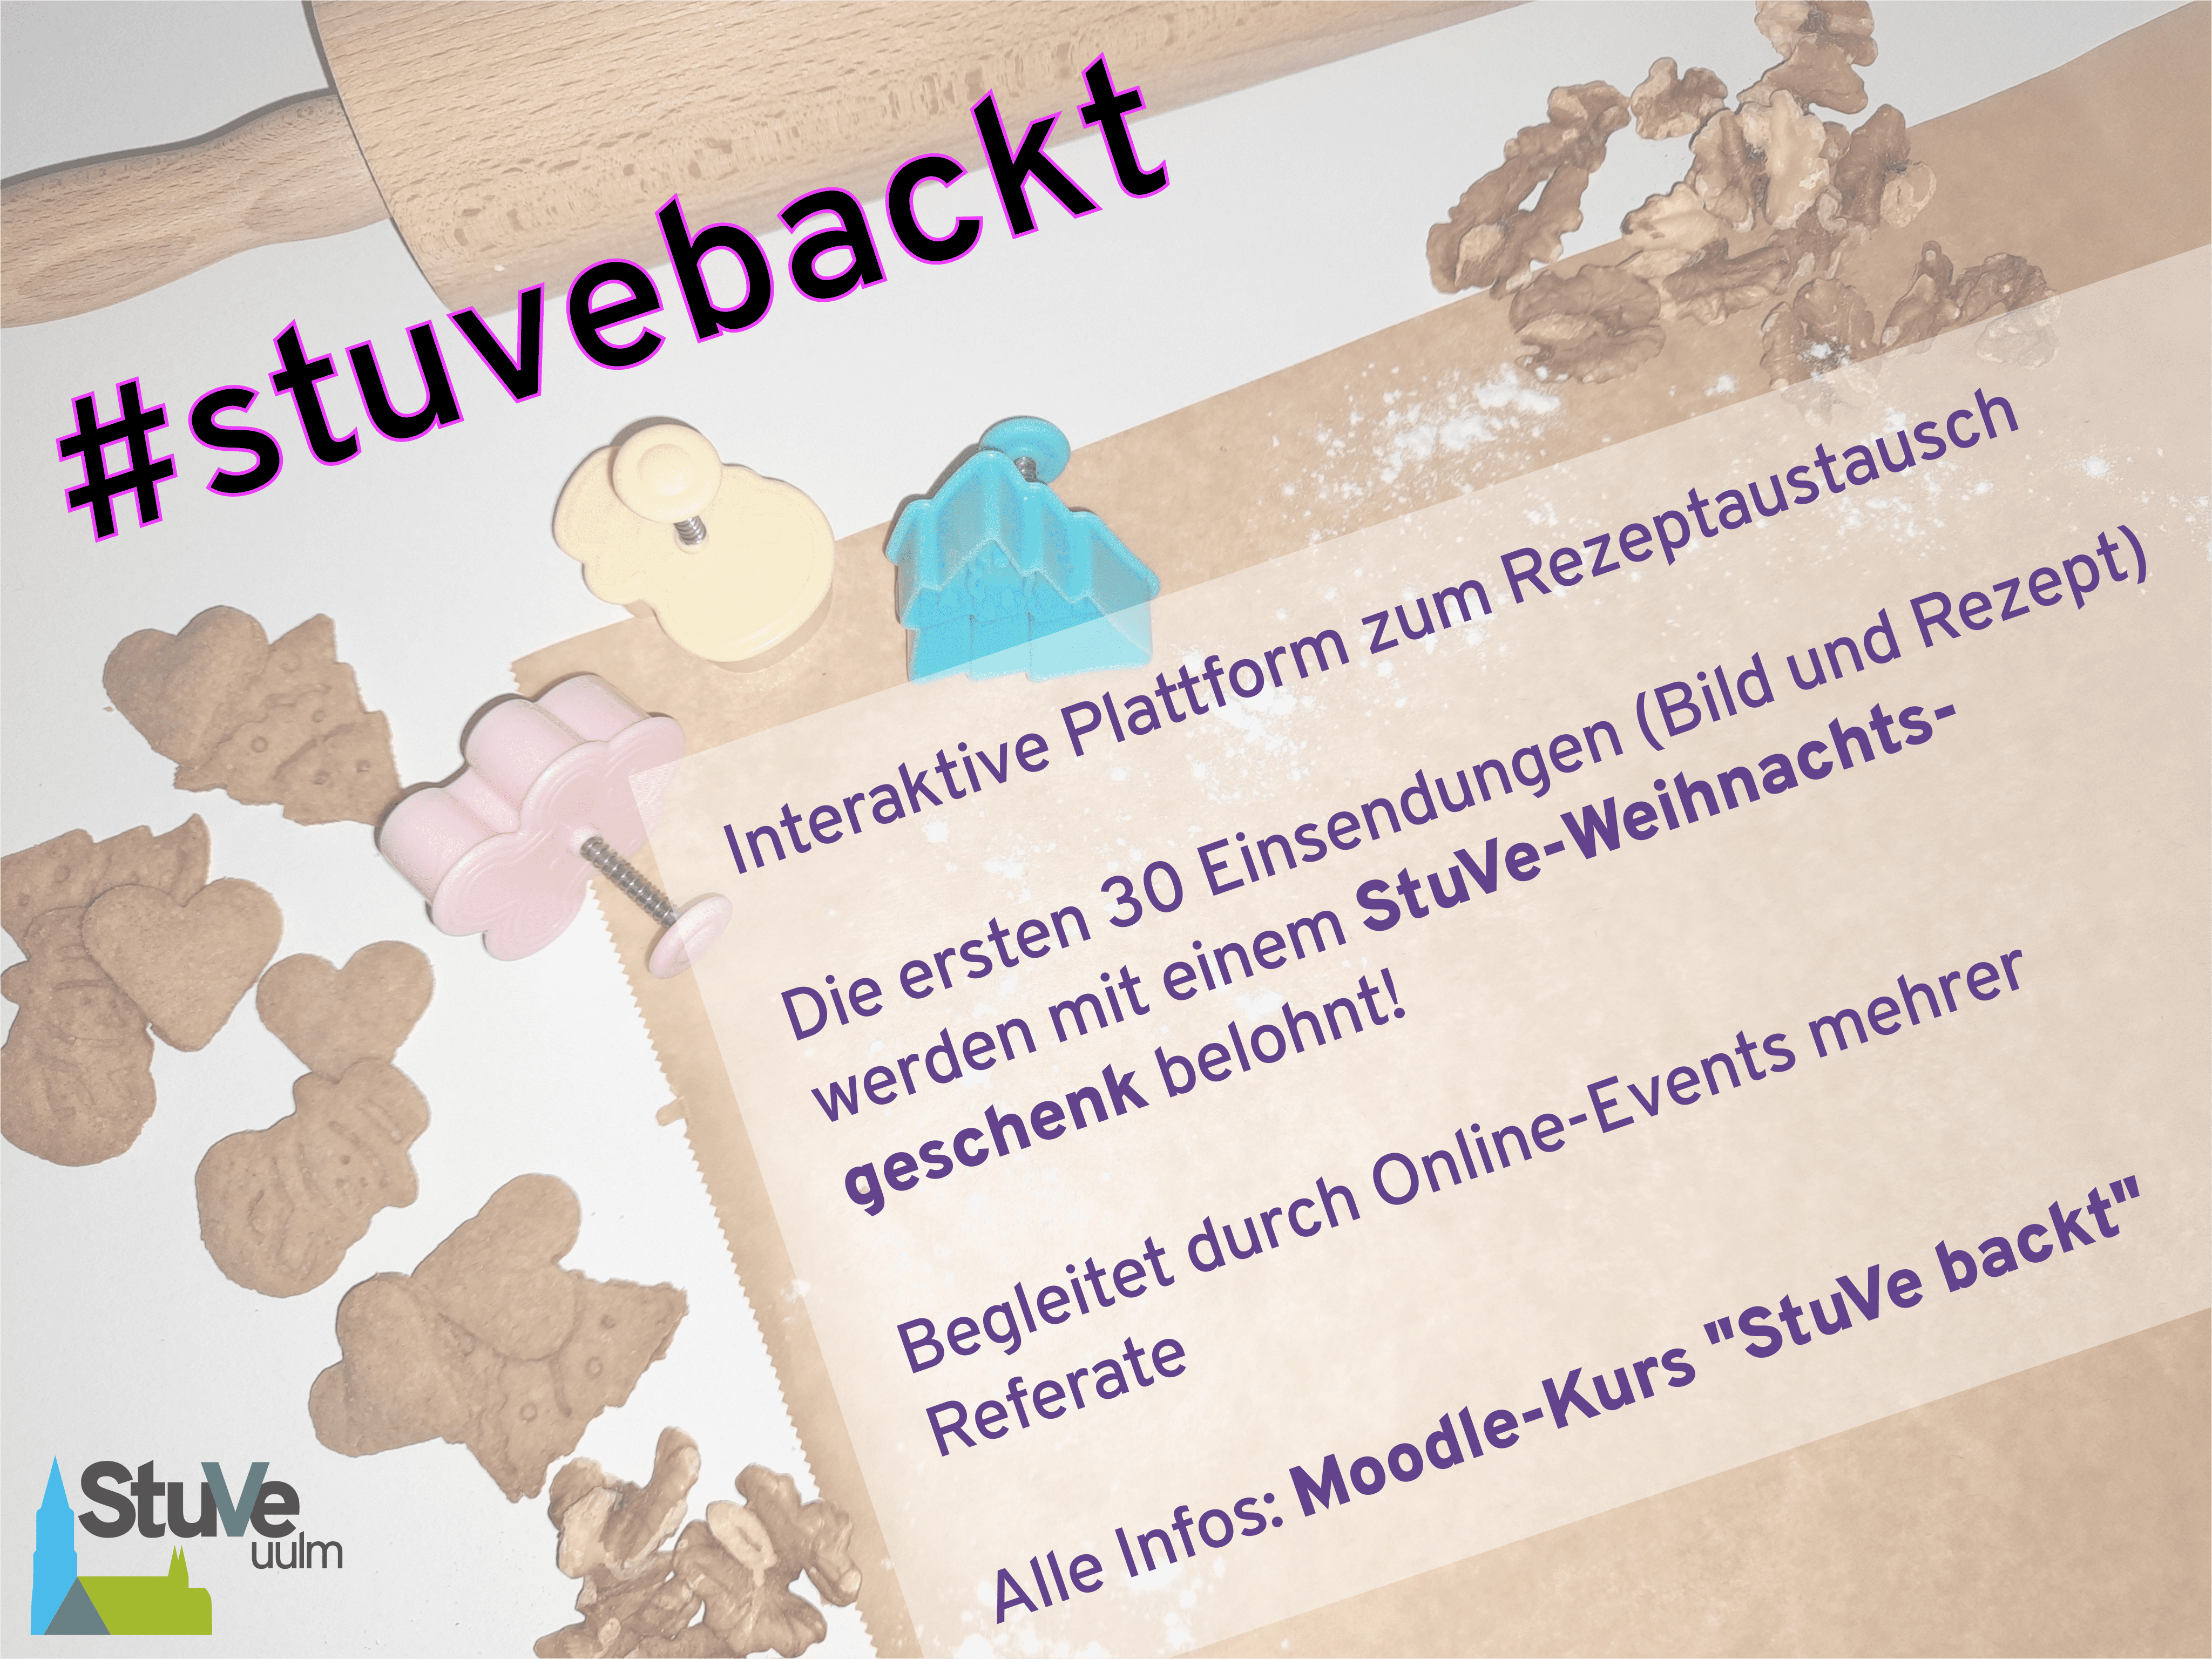 Poster for the Event "StuVe backt"